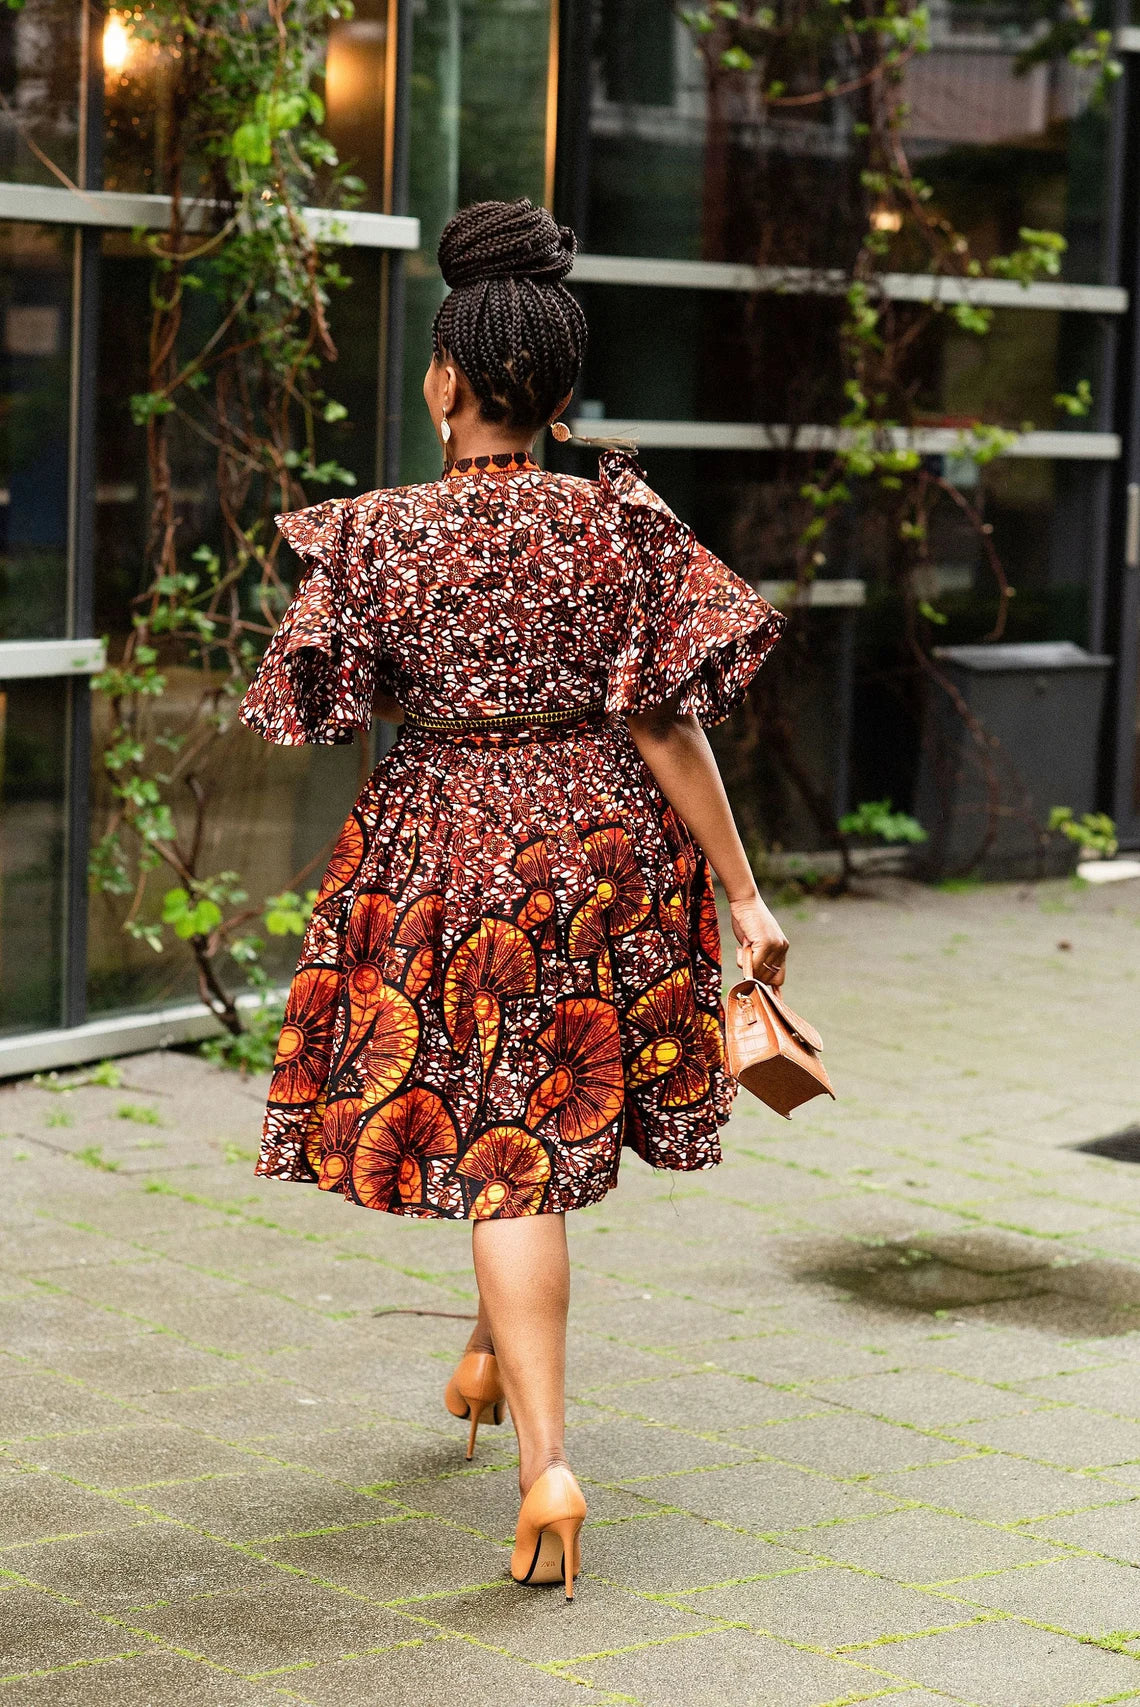 Lanre Brown Ankara High Neck Dress: Elegant African-Inspired Attire (Hand Made in Nigeria) - Flexi Africa - Flexi Africa offers Free Delivery Worldwide - Vibrant African traditional clothing showcasing bold prints and intricate designs